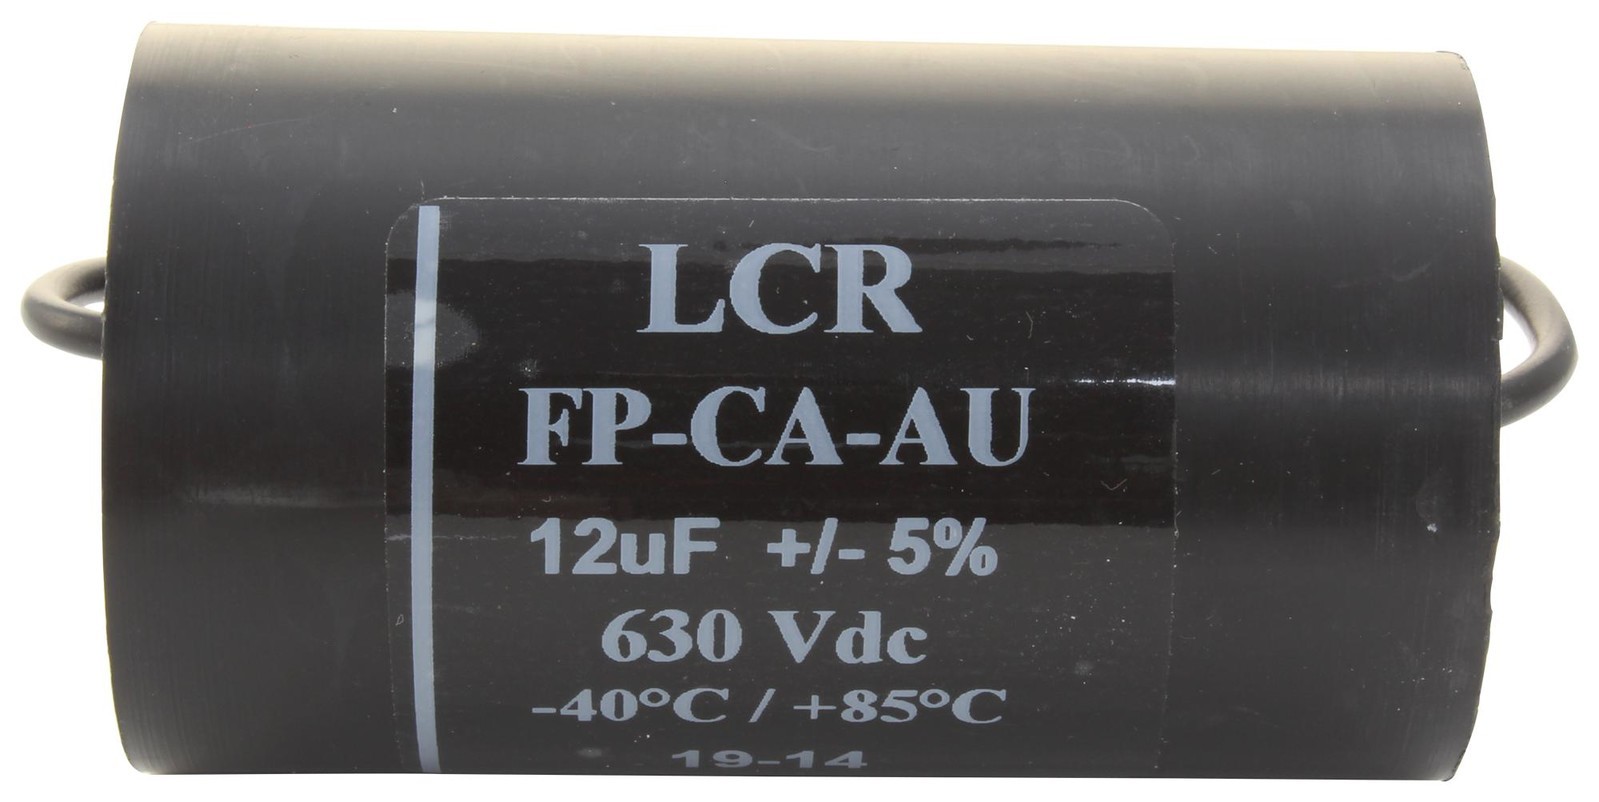 Lcr Components Fp-Ca-12-Au Capacitor, 12Îf, 630V, 5%, Pp, Panel